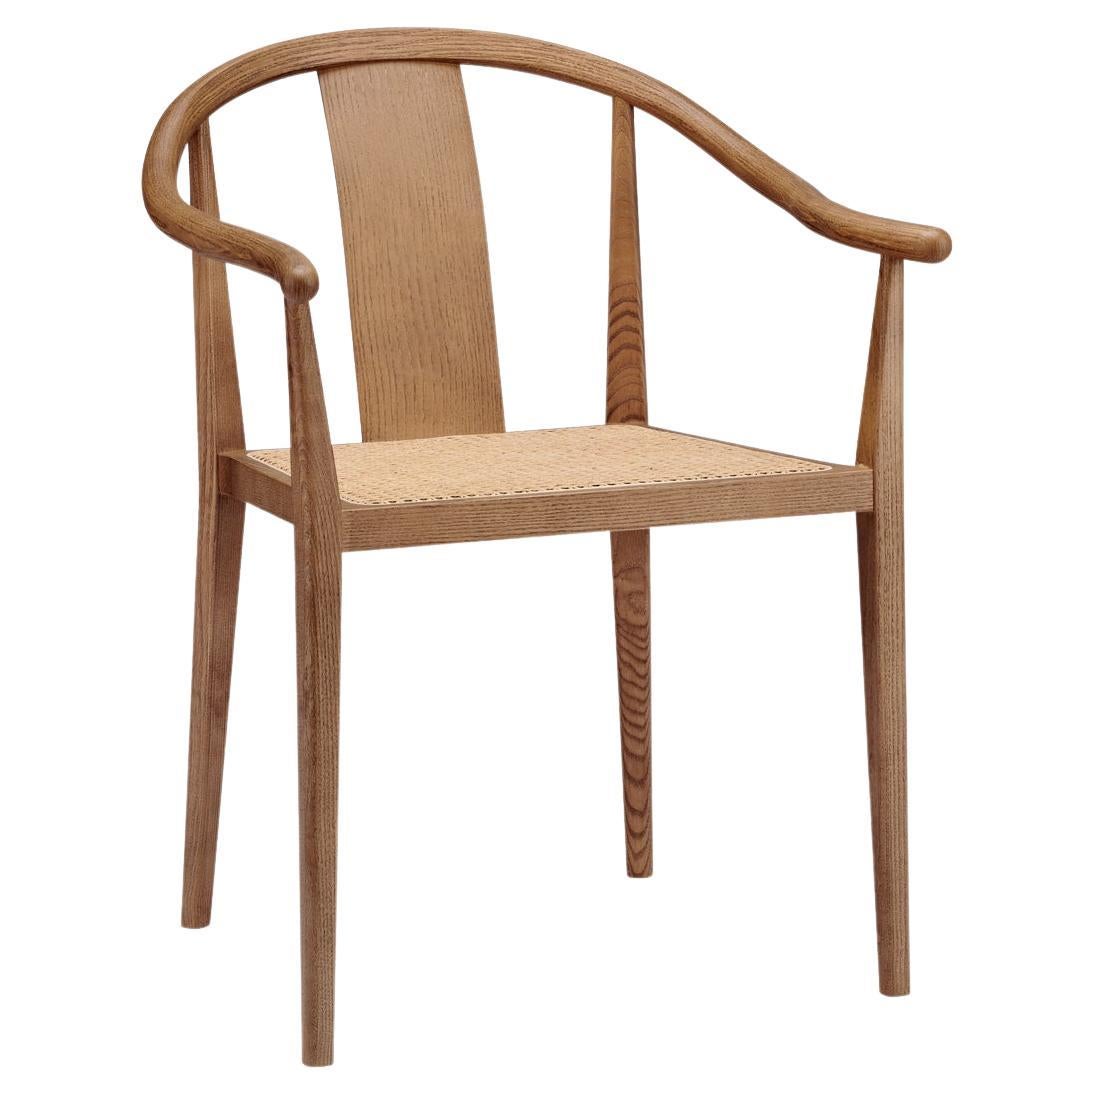 'Shanghai' Chair by Norr11, Light Smoked Oak, Natural Rattan For Sale